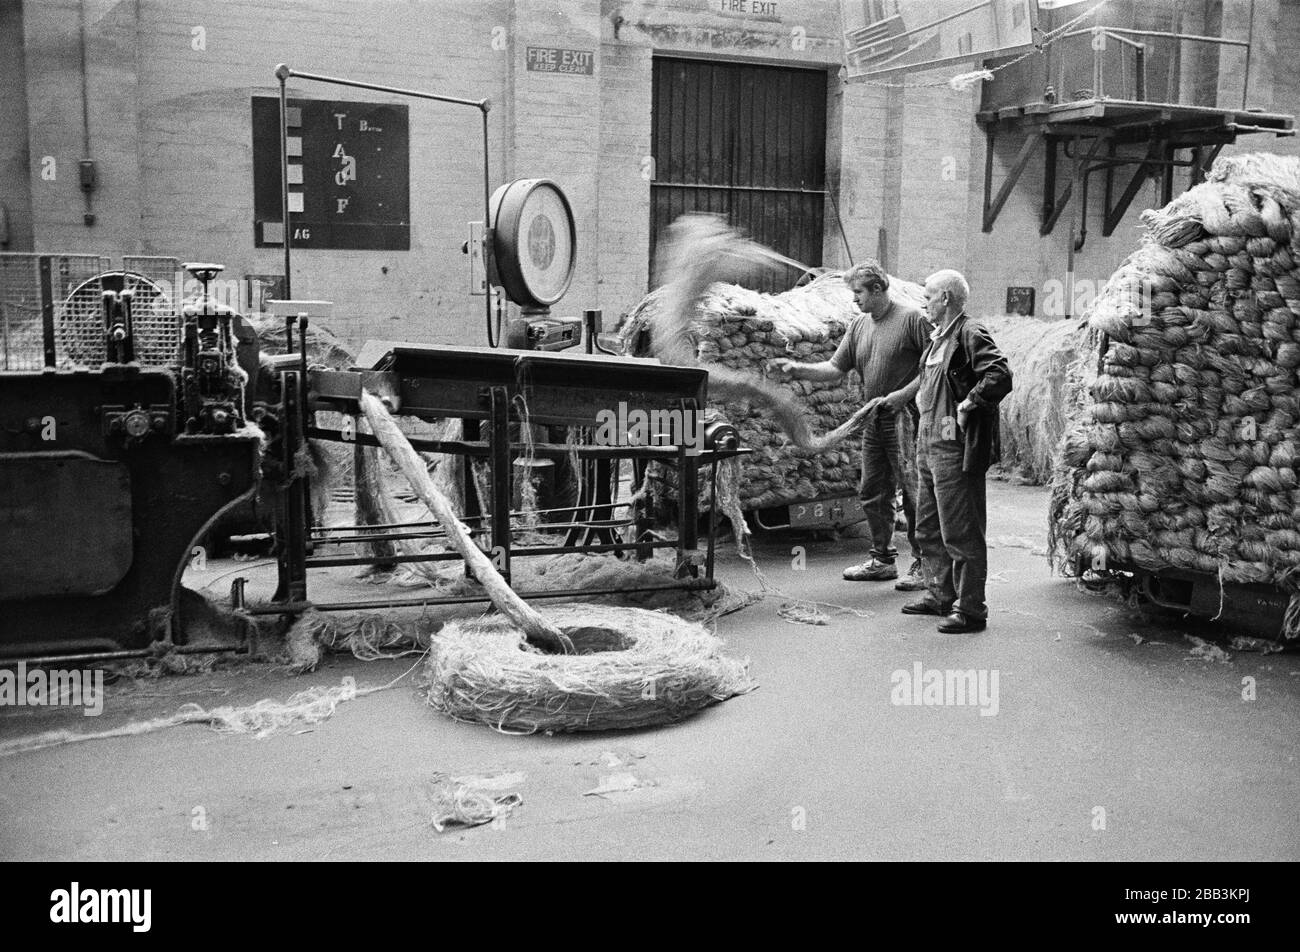 Two workers feeding jute into a machine at Tay Spinners mill in Dundee, Scotland. This factory was the last jute spinning mill in Europe when it closed for the final time in 1998. The city of Dundee had been famous throughout history for the three 'Js' - jute, jam and journalism. Stock Photo